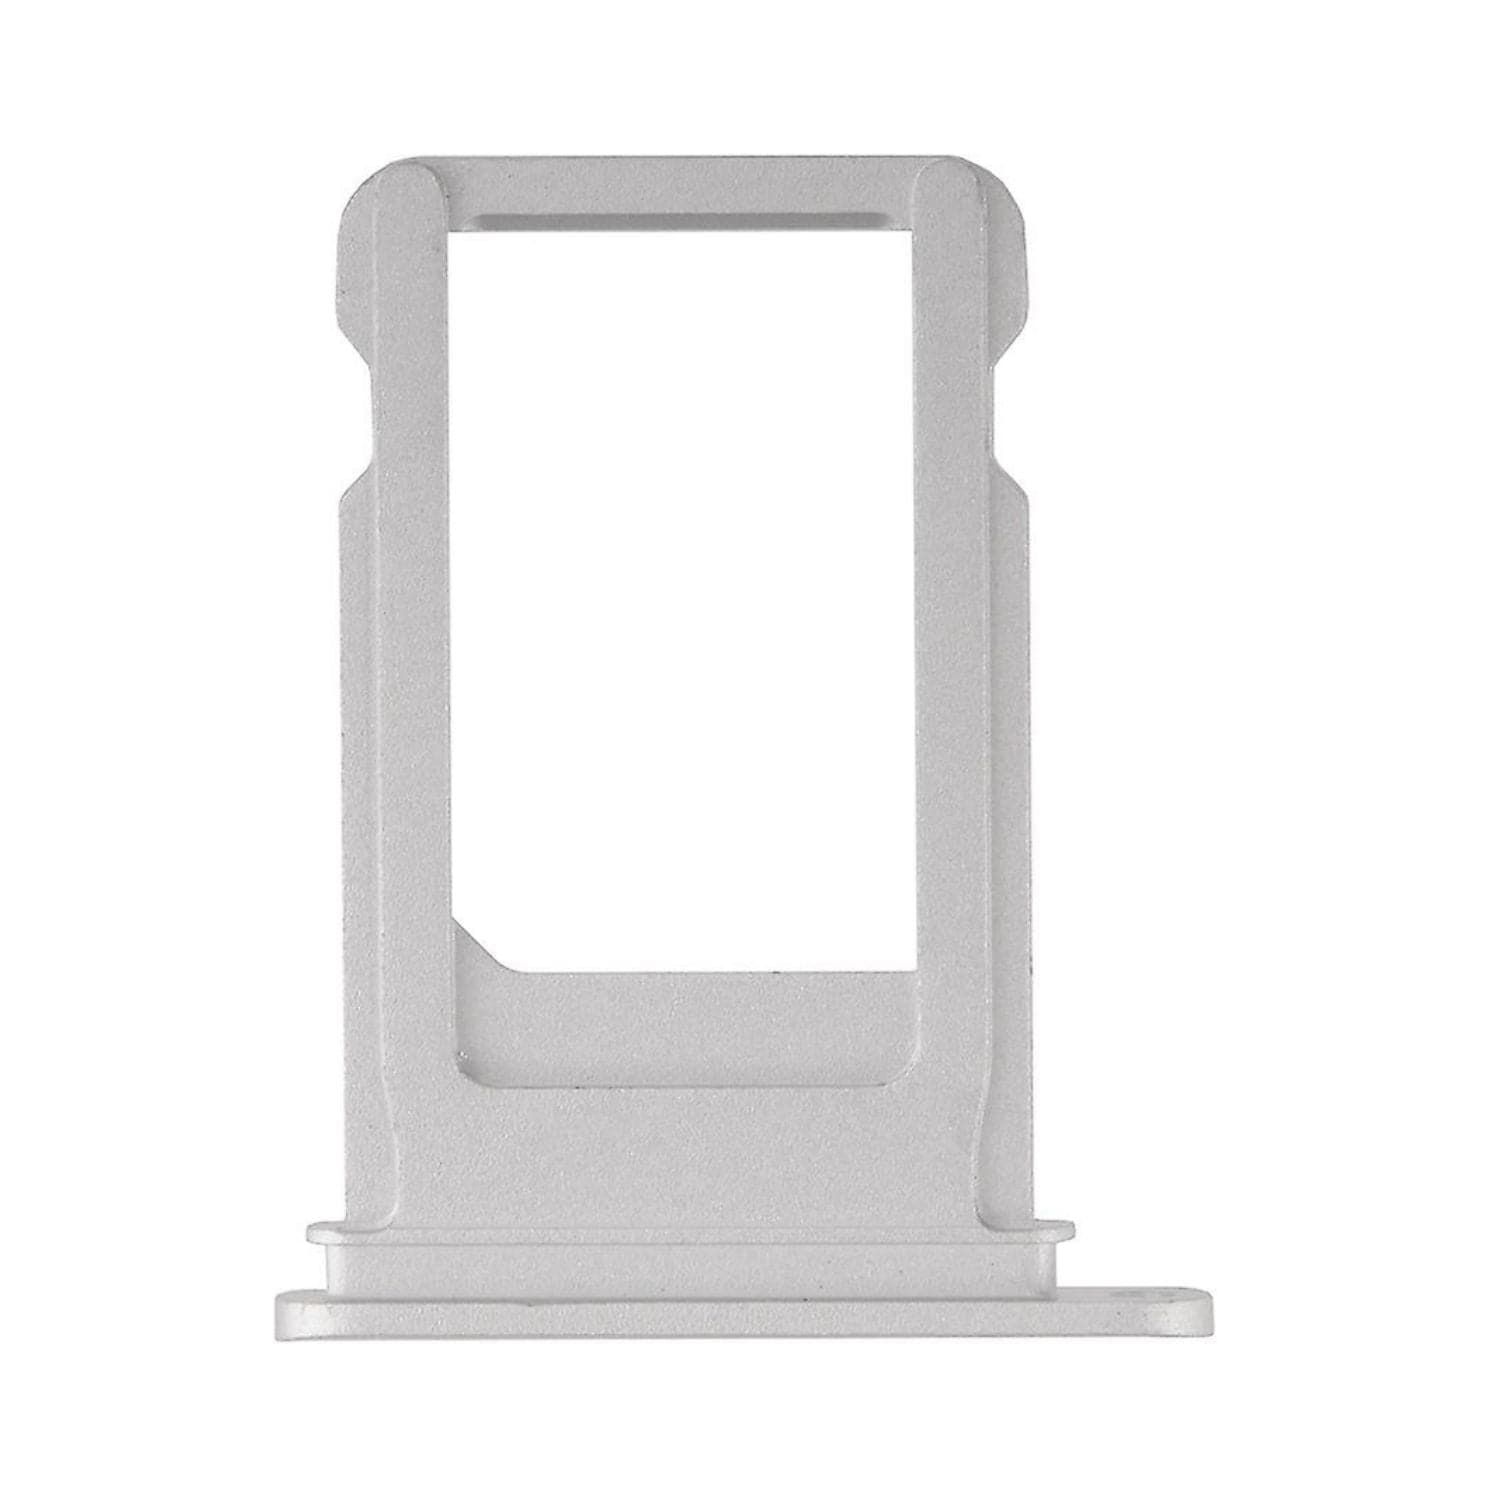 Sim Tray for iPhone 7 Silver